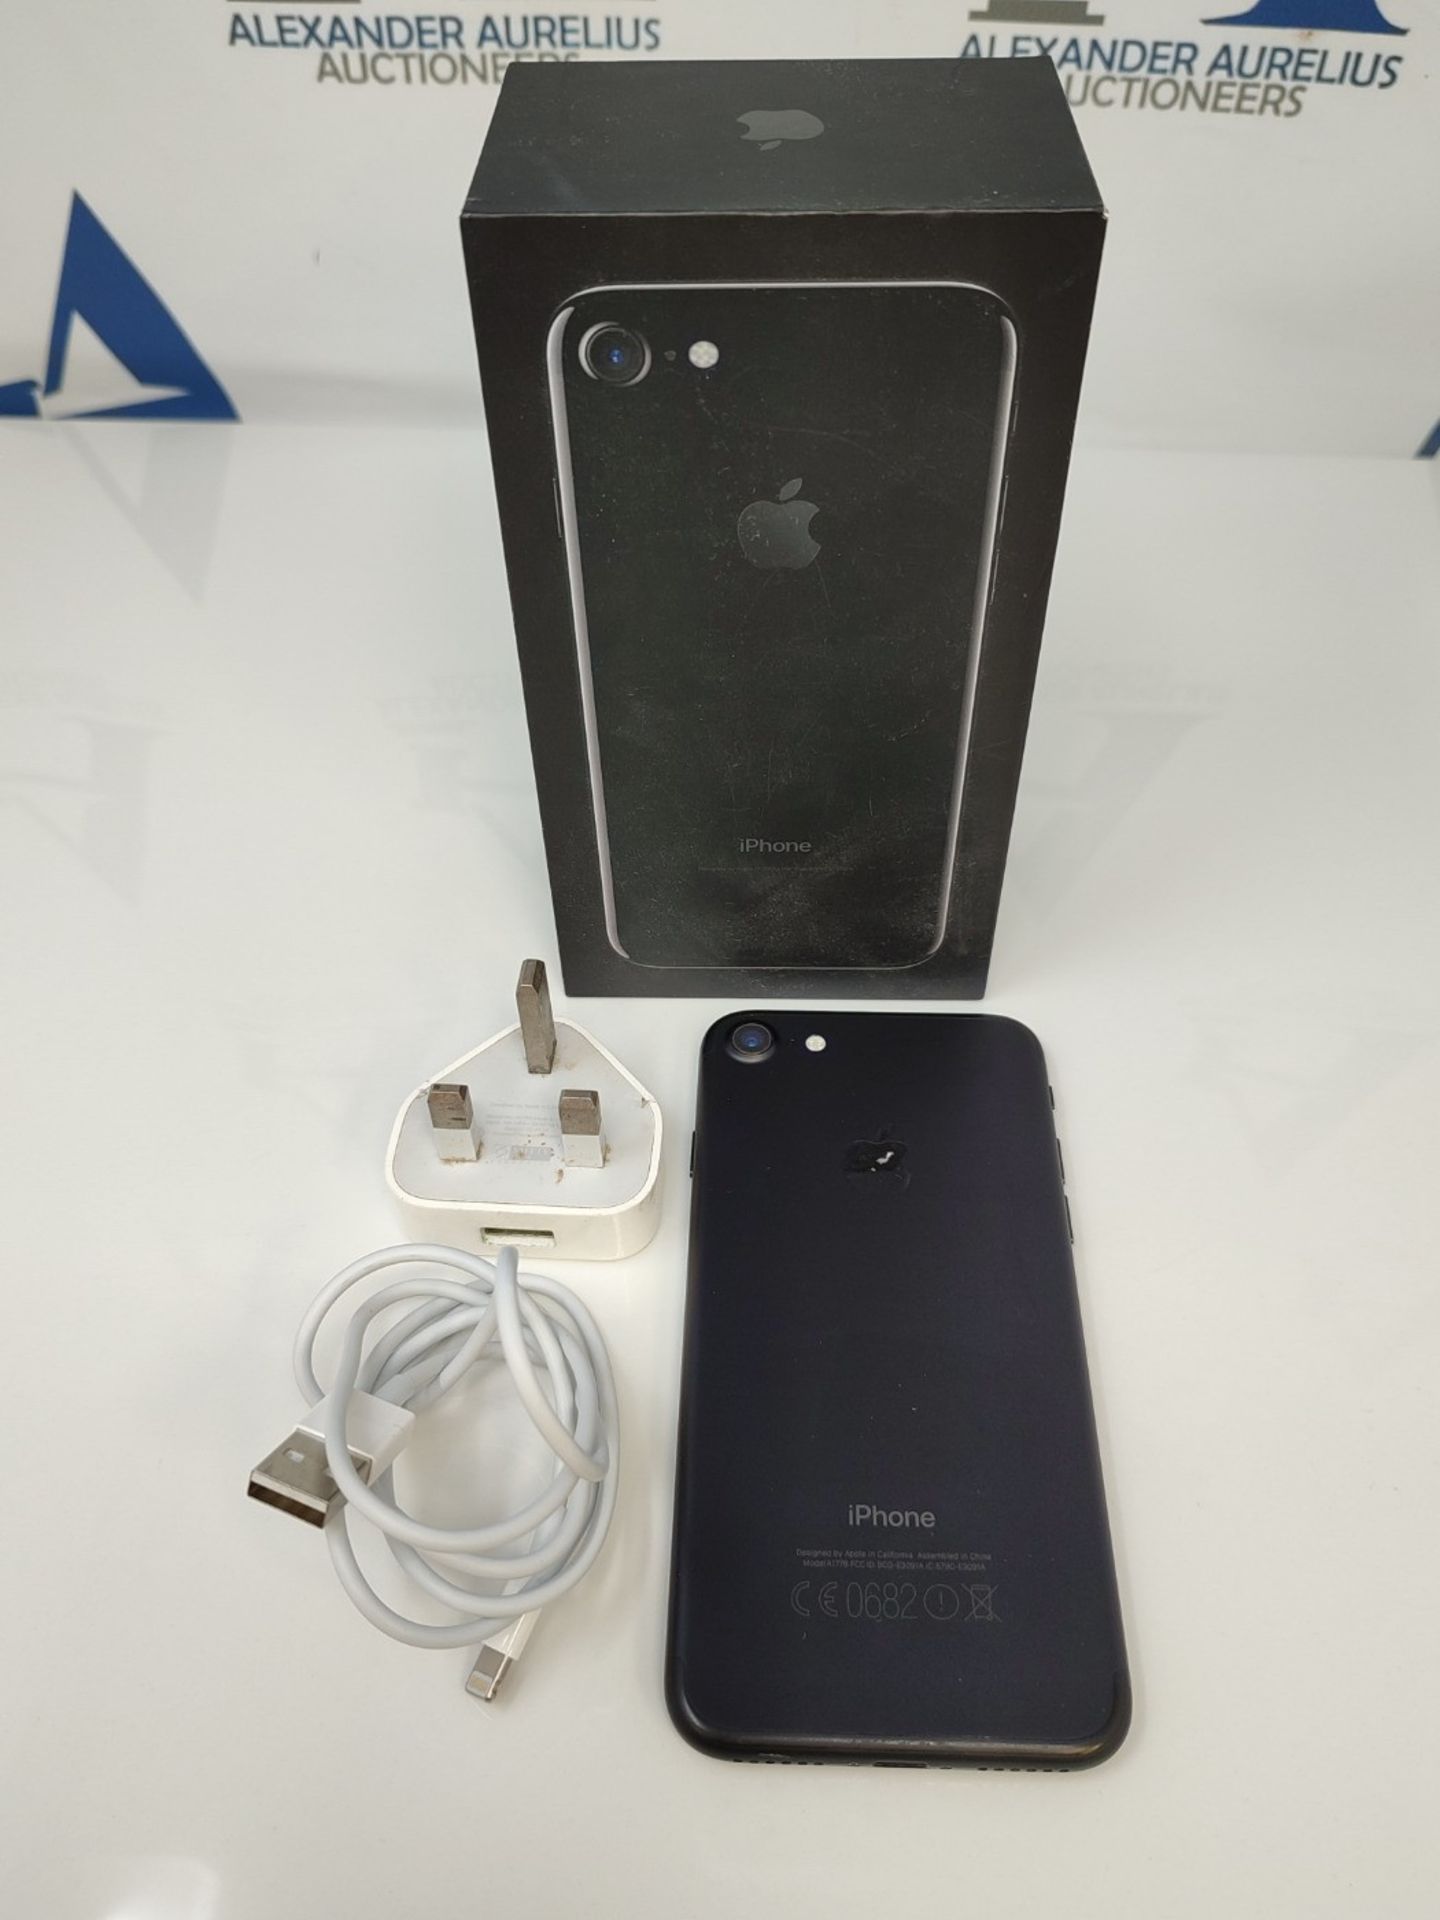 Apple iPhone 7 model A1778 - Image 2 of 2